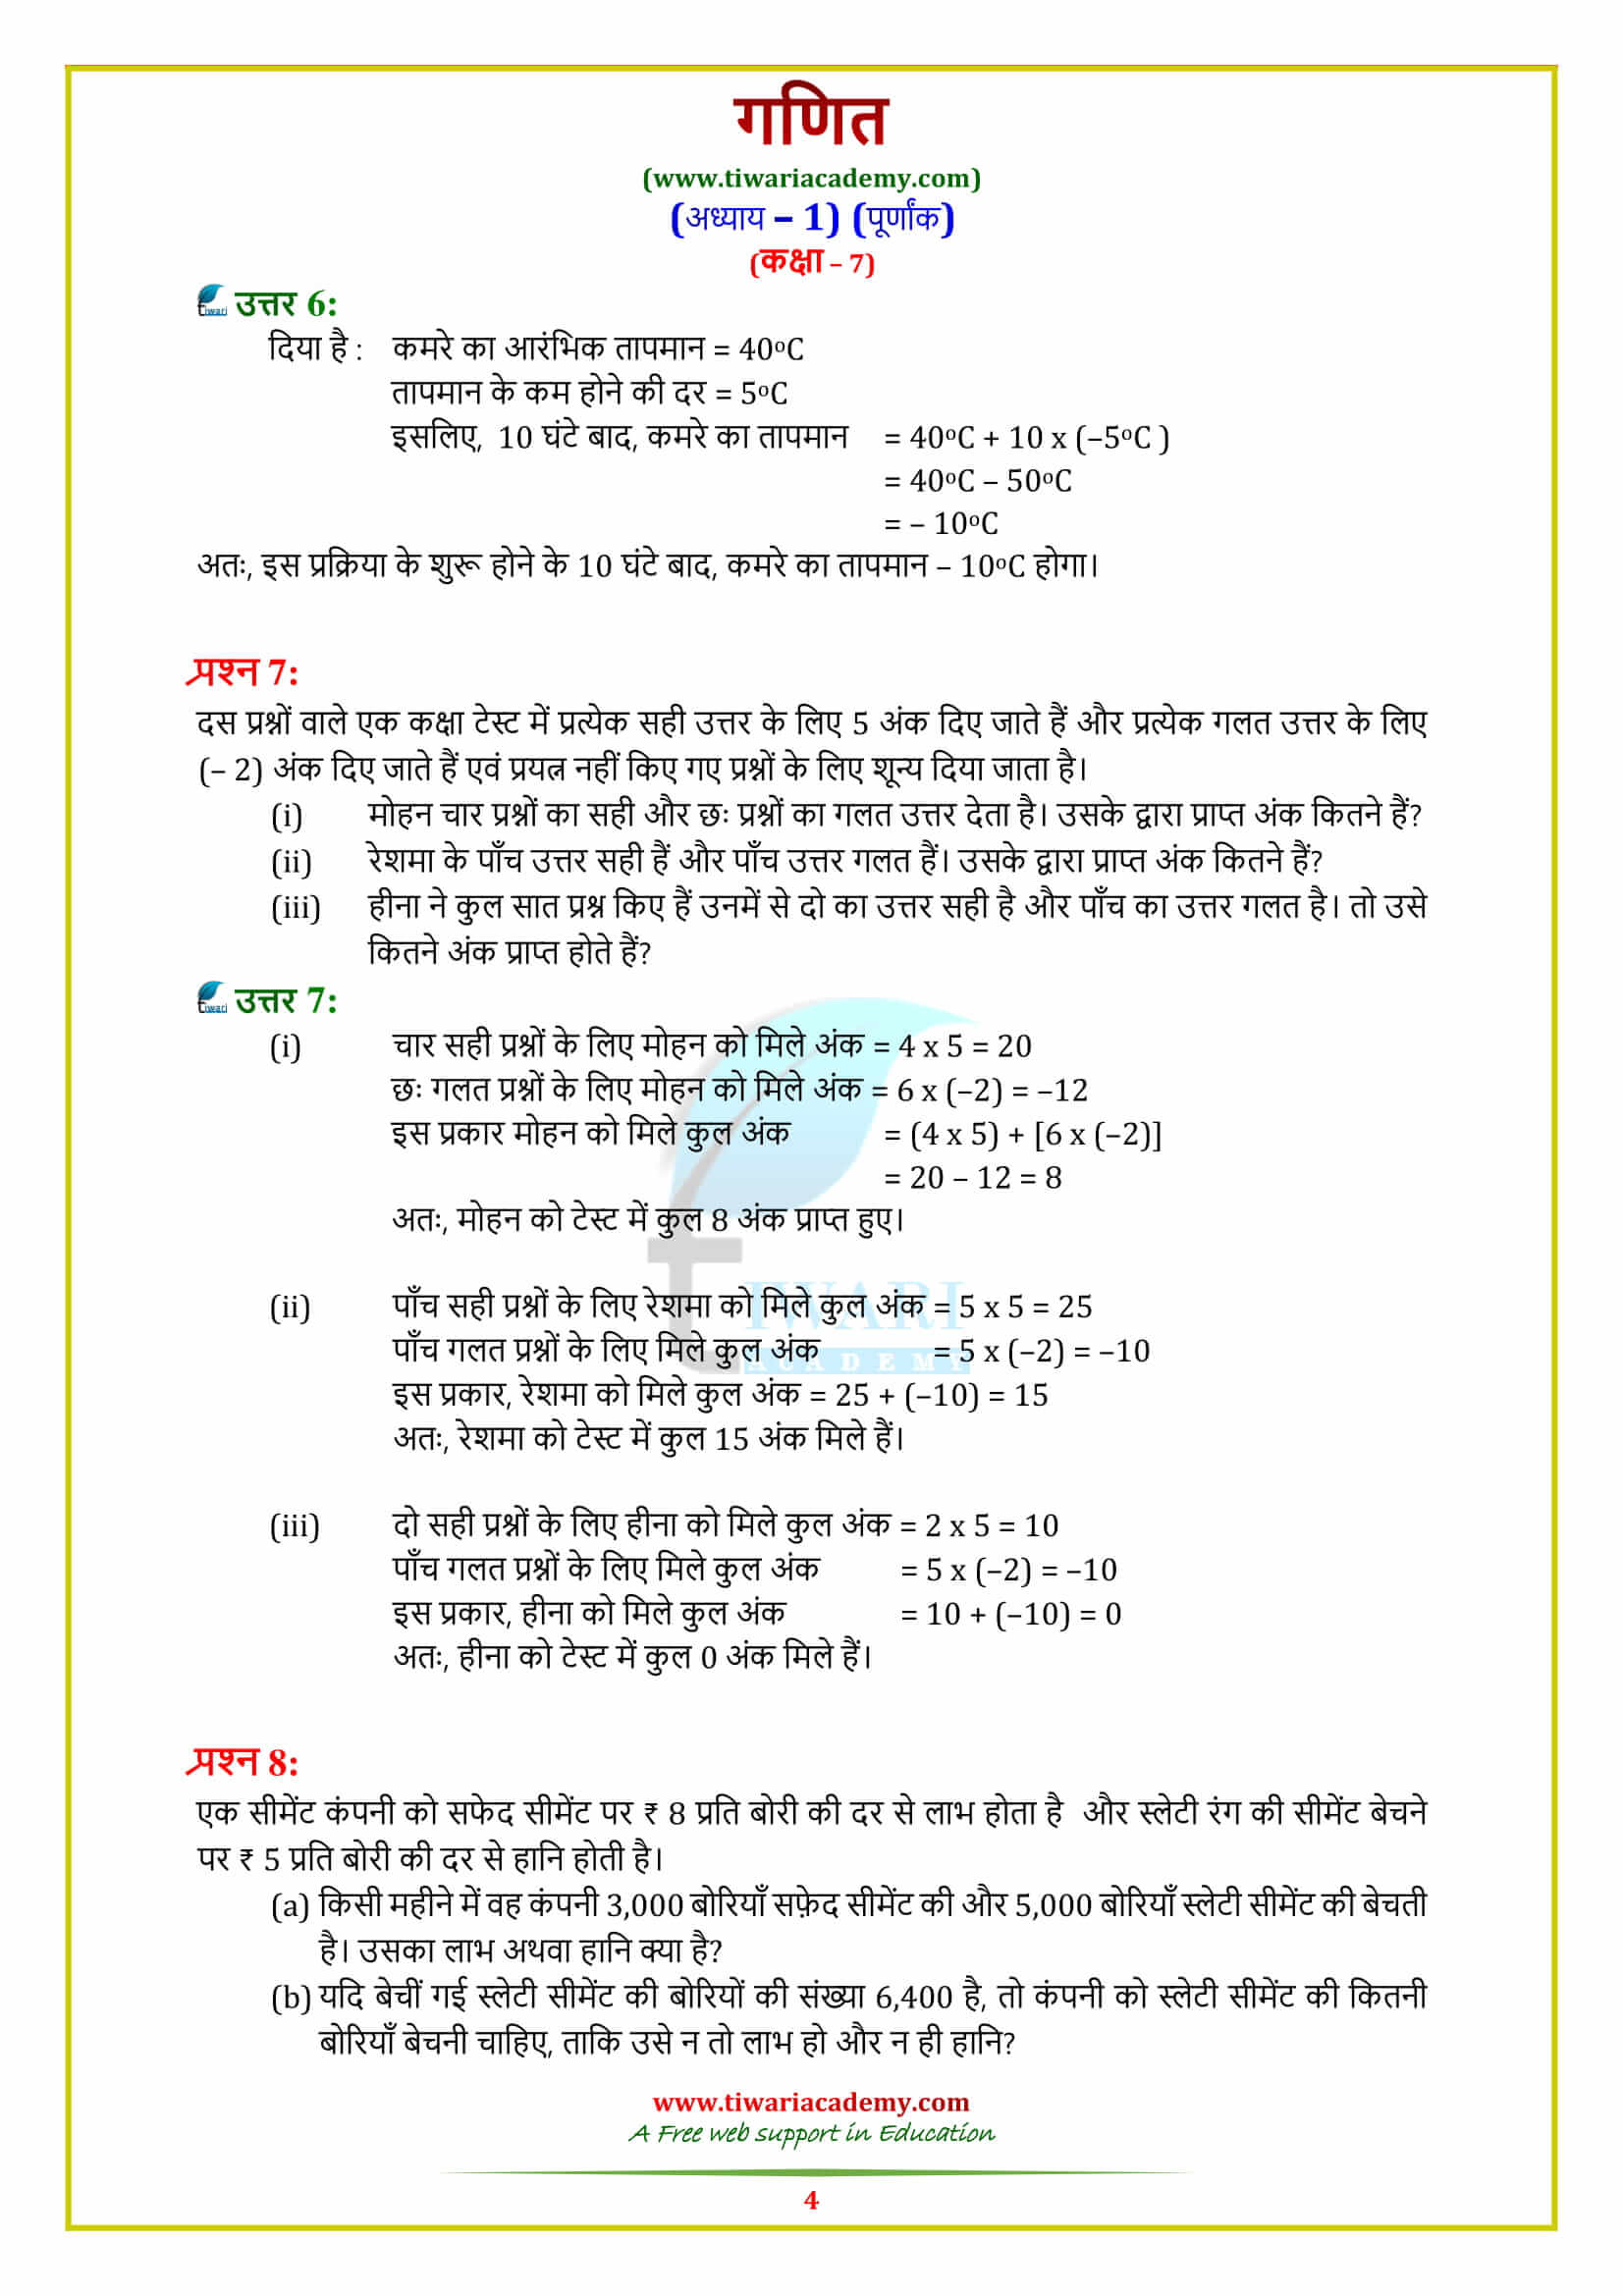 7 Maths Exercise 1.3 solutions in hindi